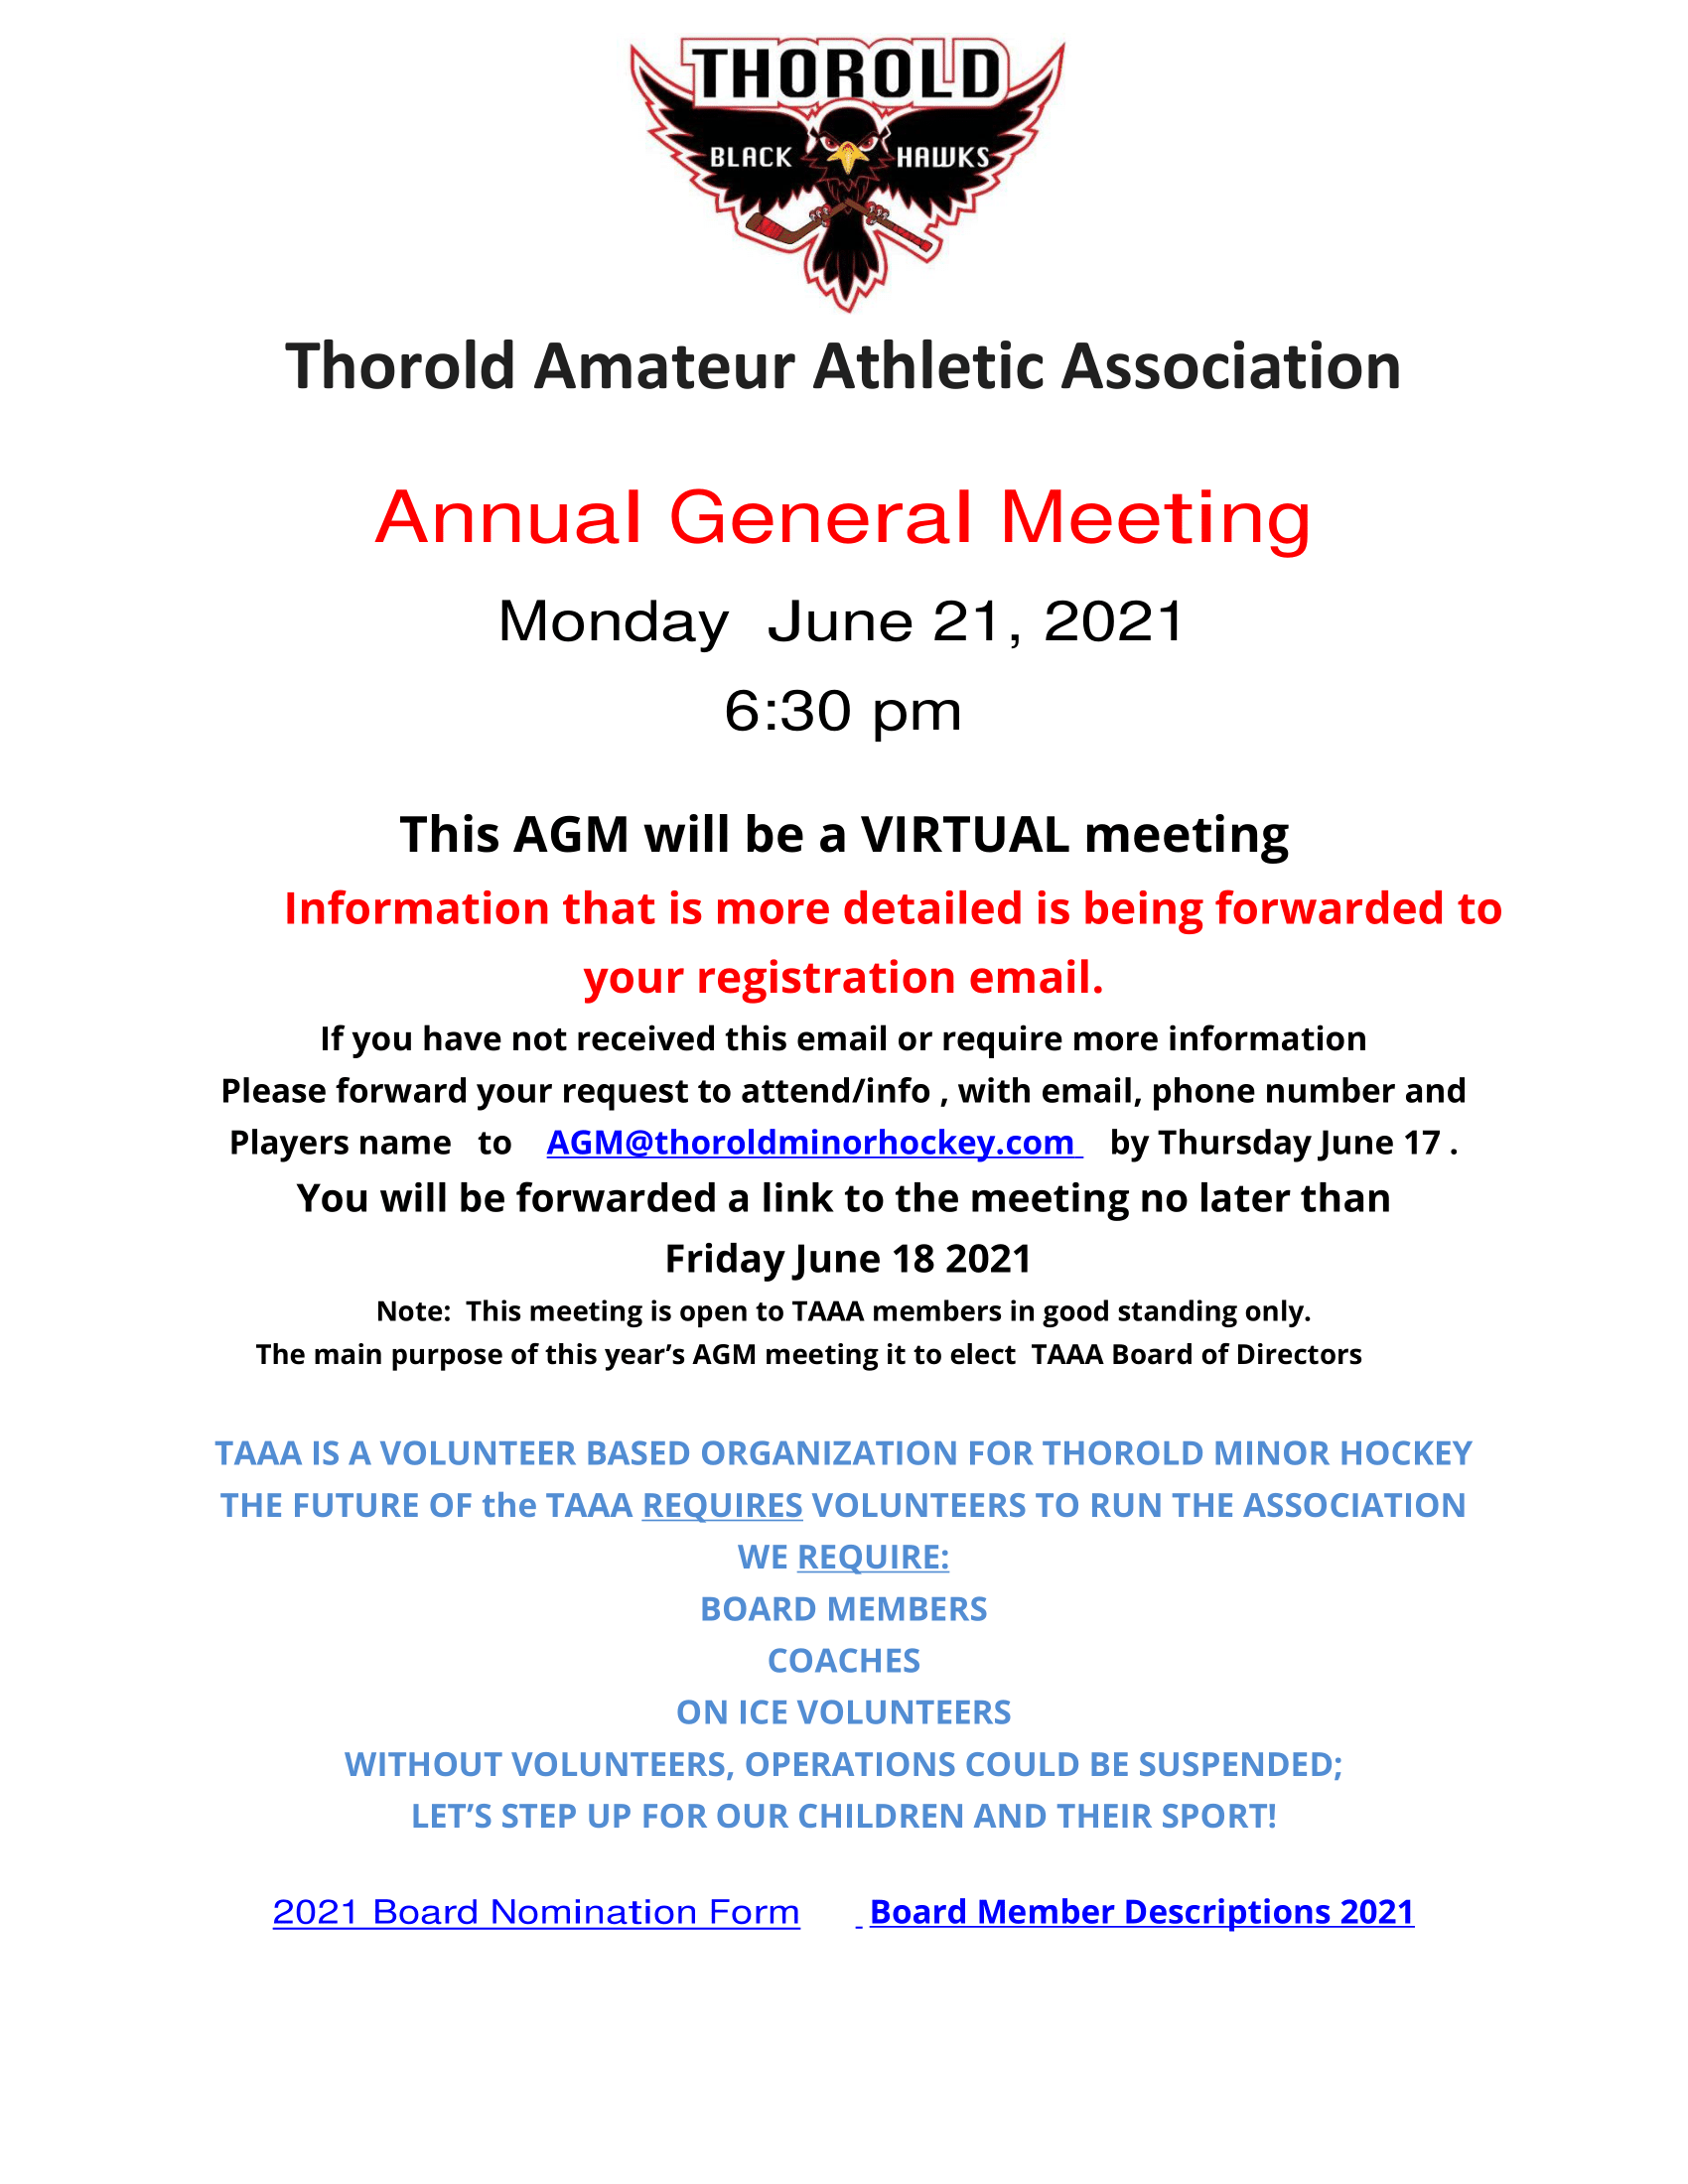 AGM_TAAA_information_2021_Website_-1.png